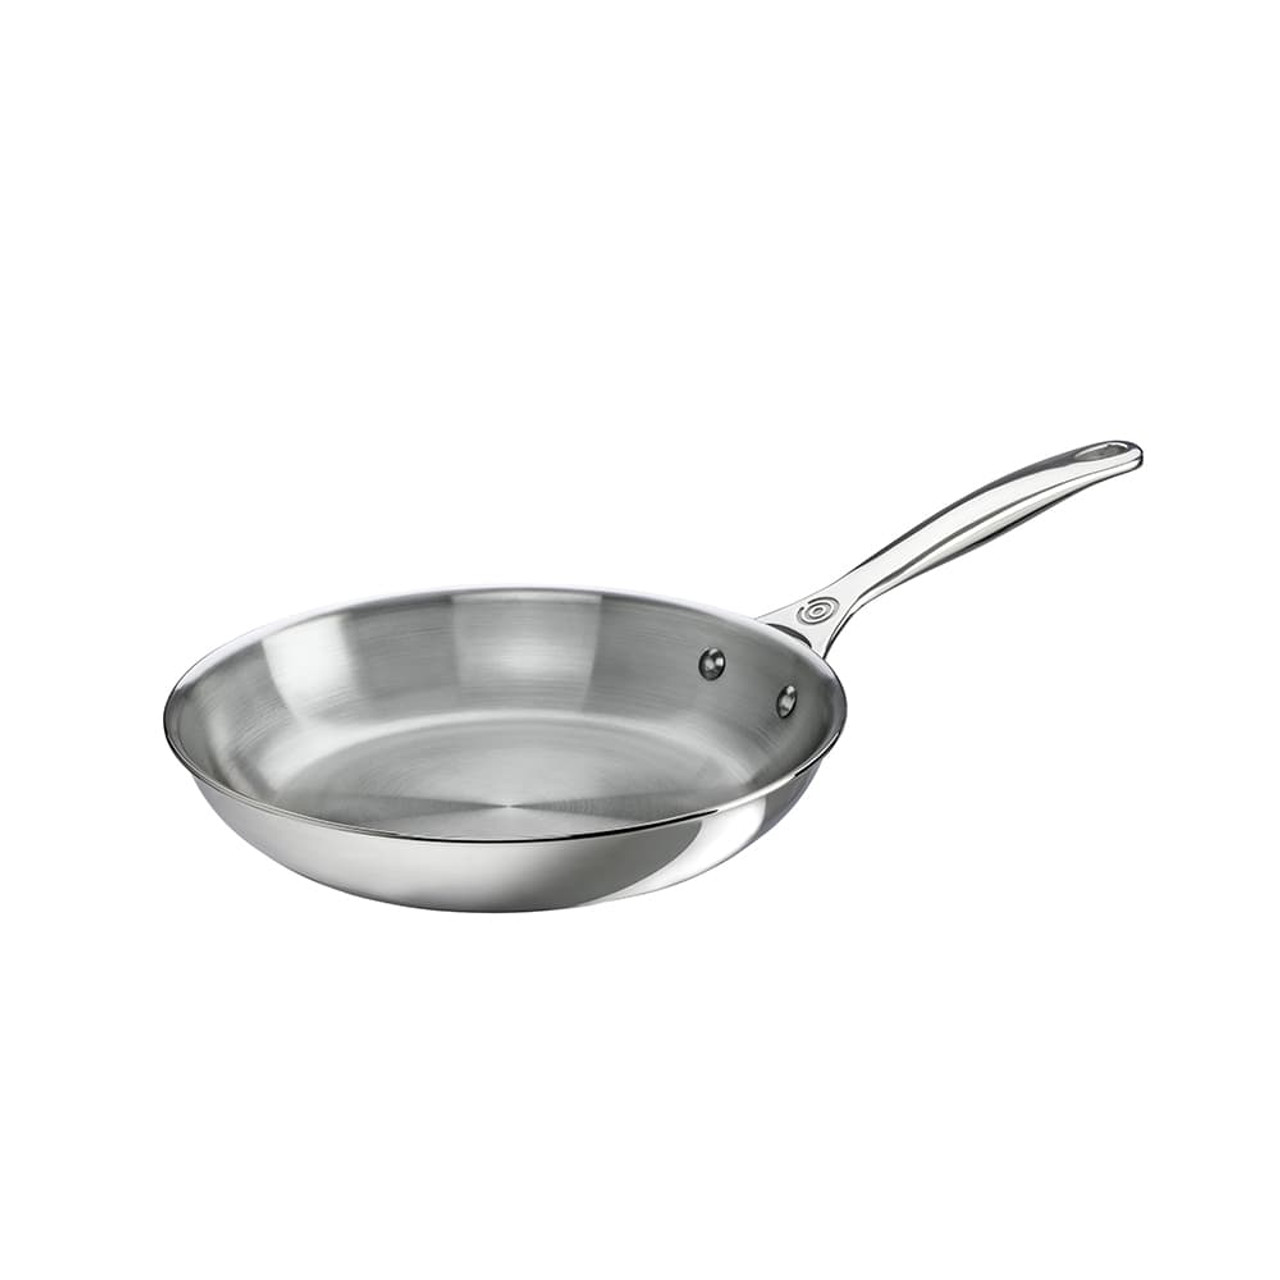 https://cdn11.bigcommerce.com/s-hccytny0od/images/stencil/1280x1280/products/862/1372/le-creuset-stainless-steel-fry-pan-8-inch__13117.1588524152.jpg?c=2?imbypass=on